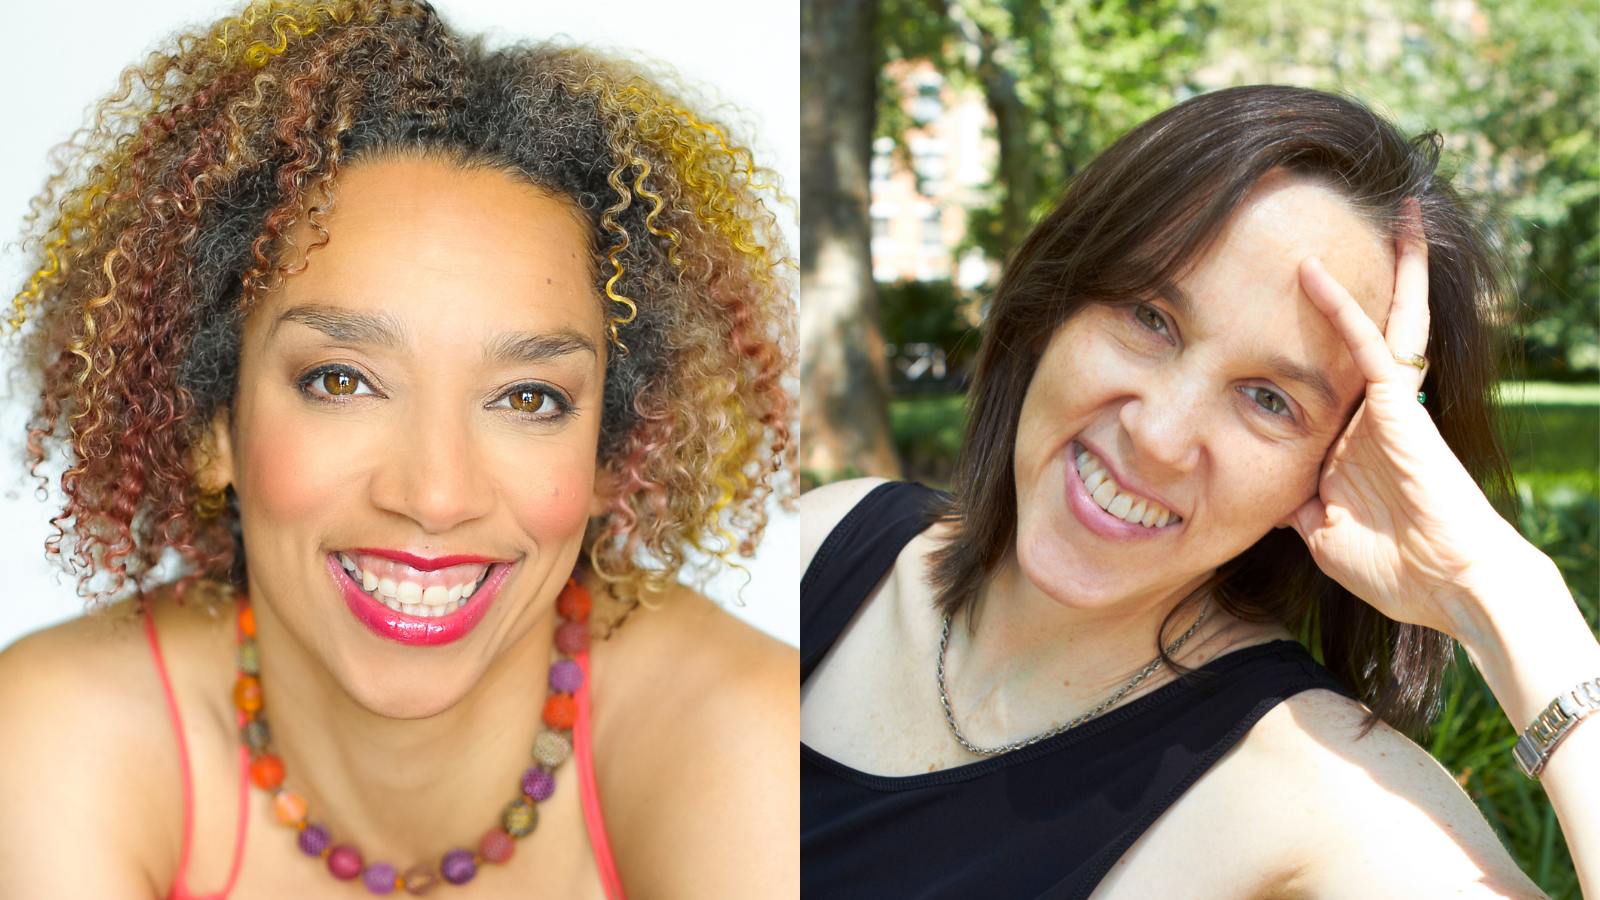 Two headshots side by side. On left, woman smiling with pink lipstick and colorful necklace, looking at camera. On right, woman looks at camera, smiling, with head in hand, in front of green foliage.